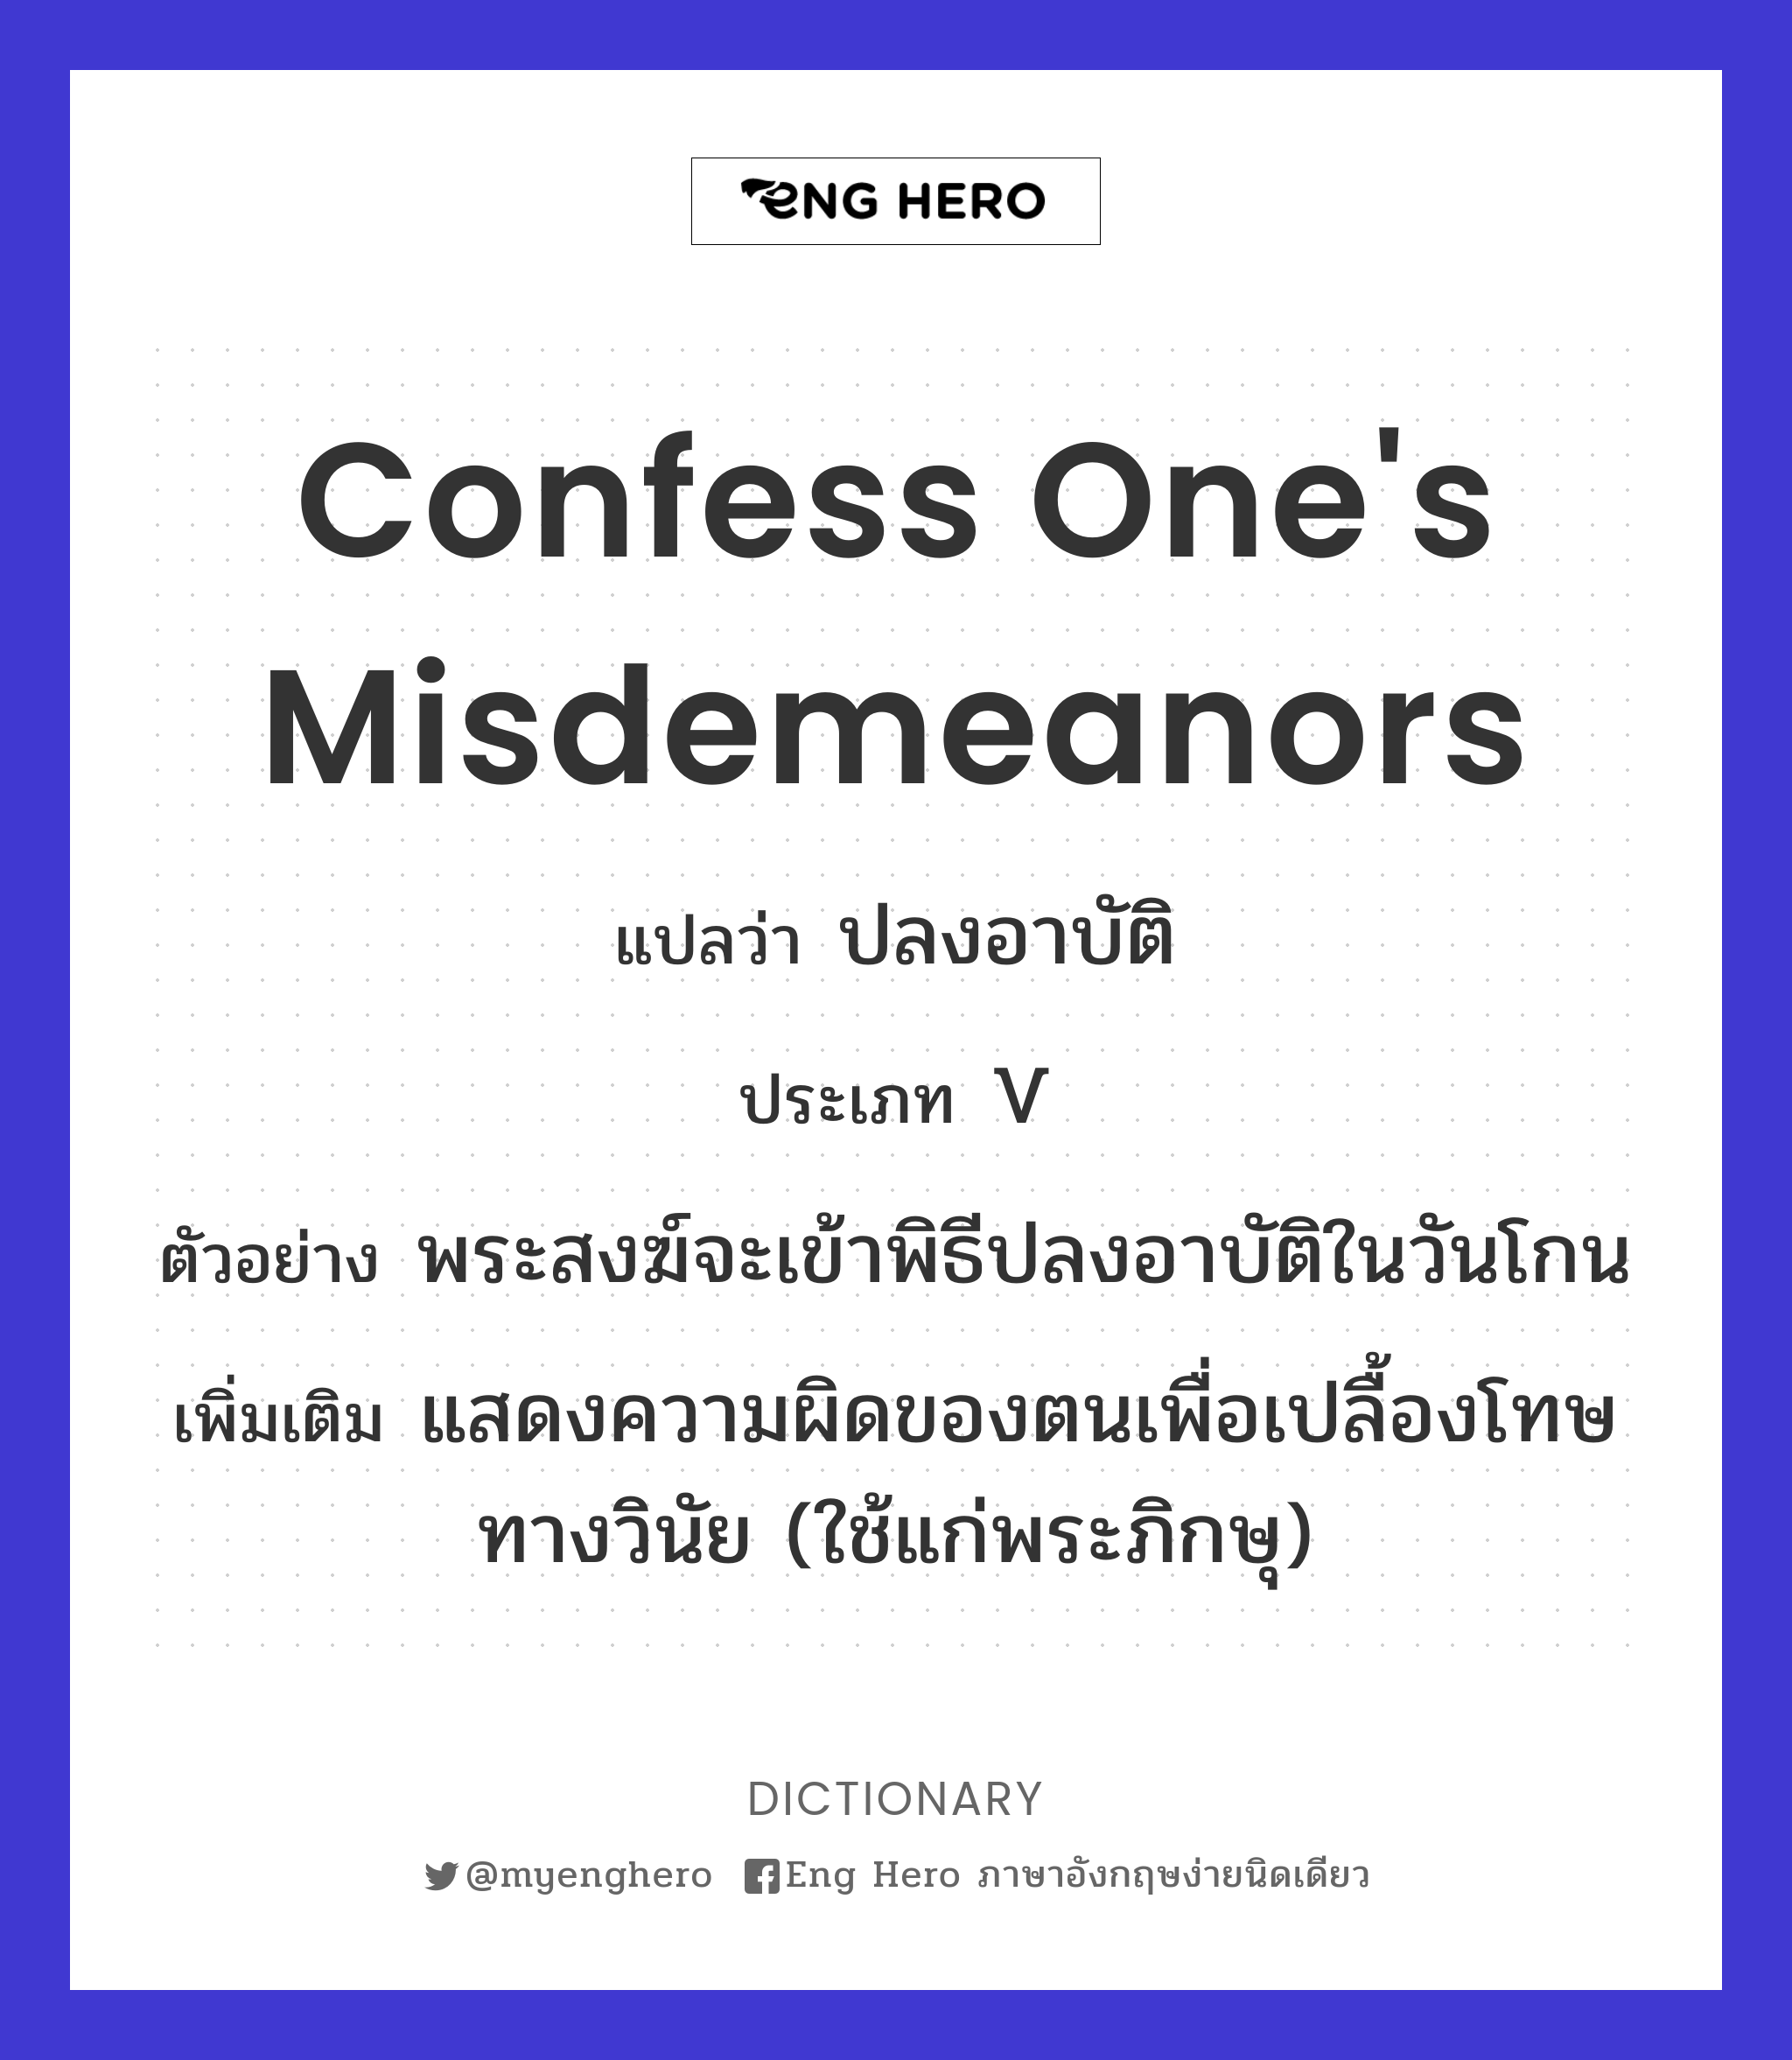 confess one's misdemeanors